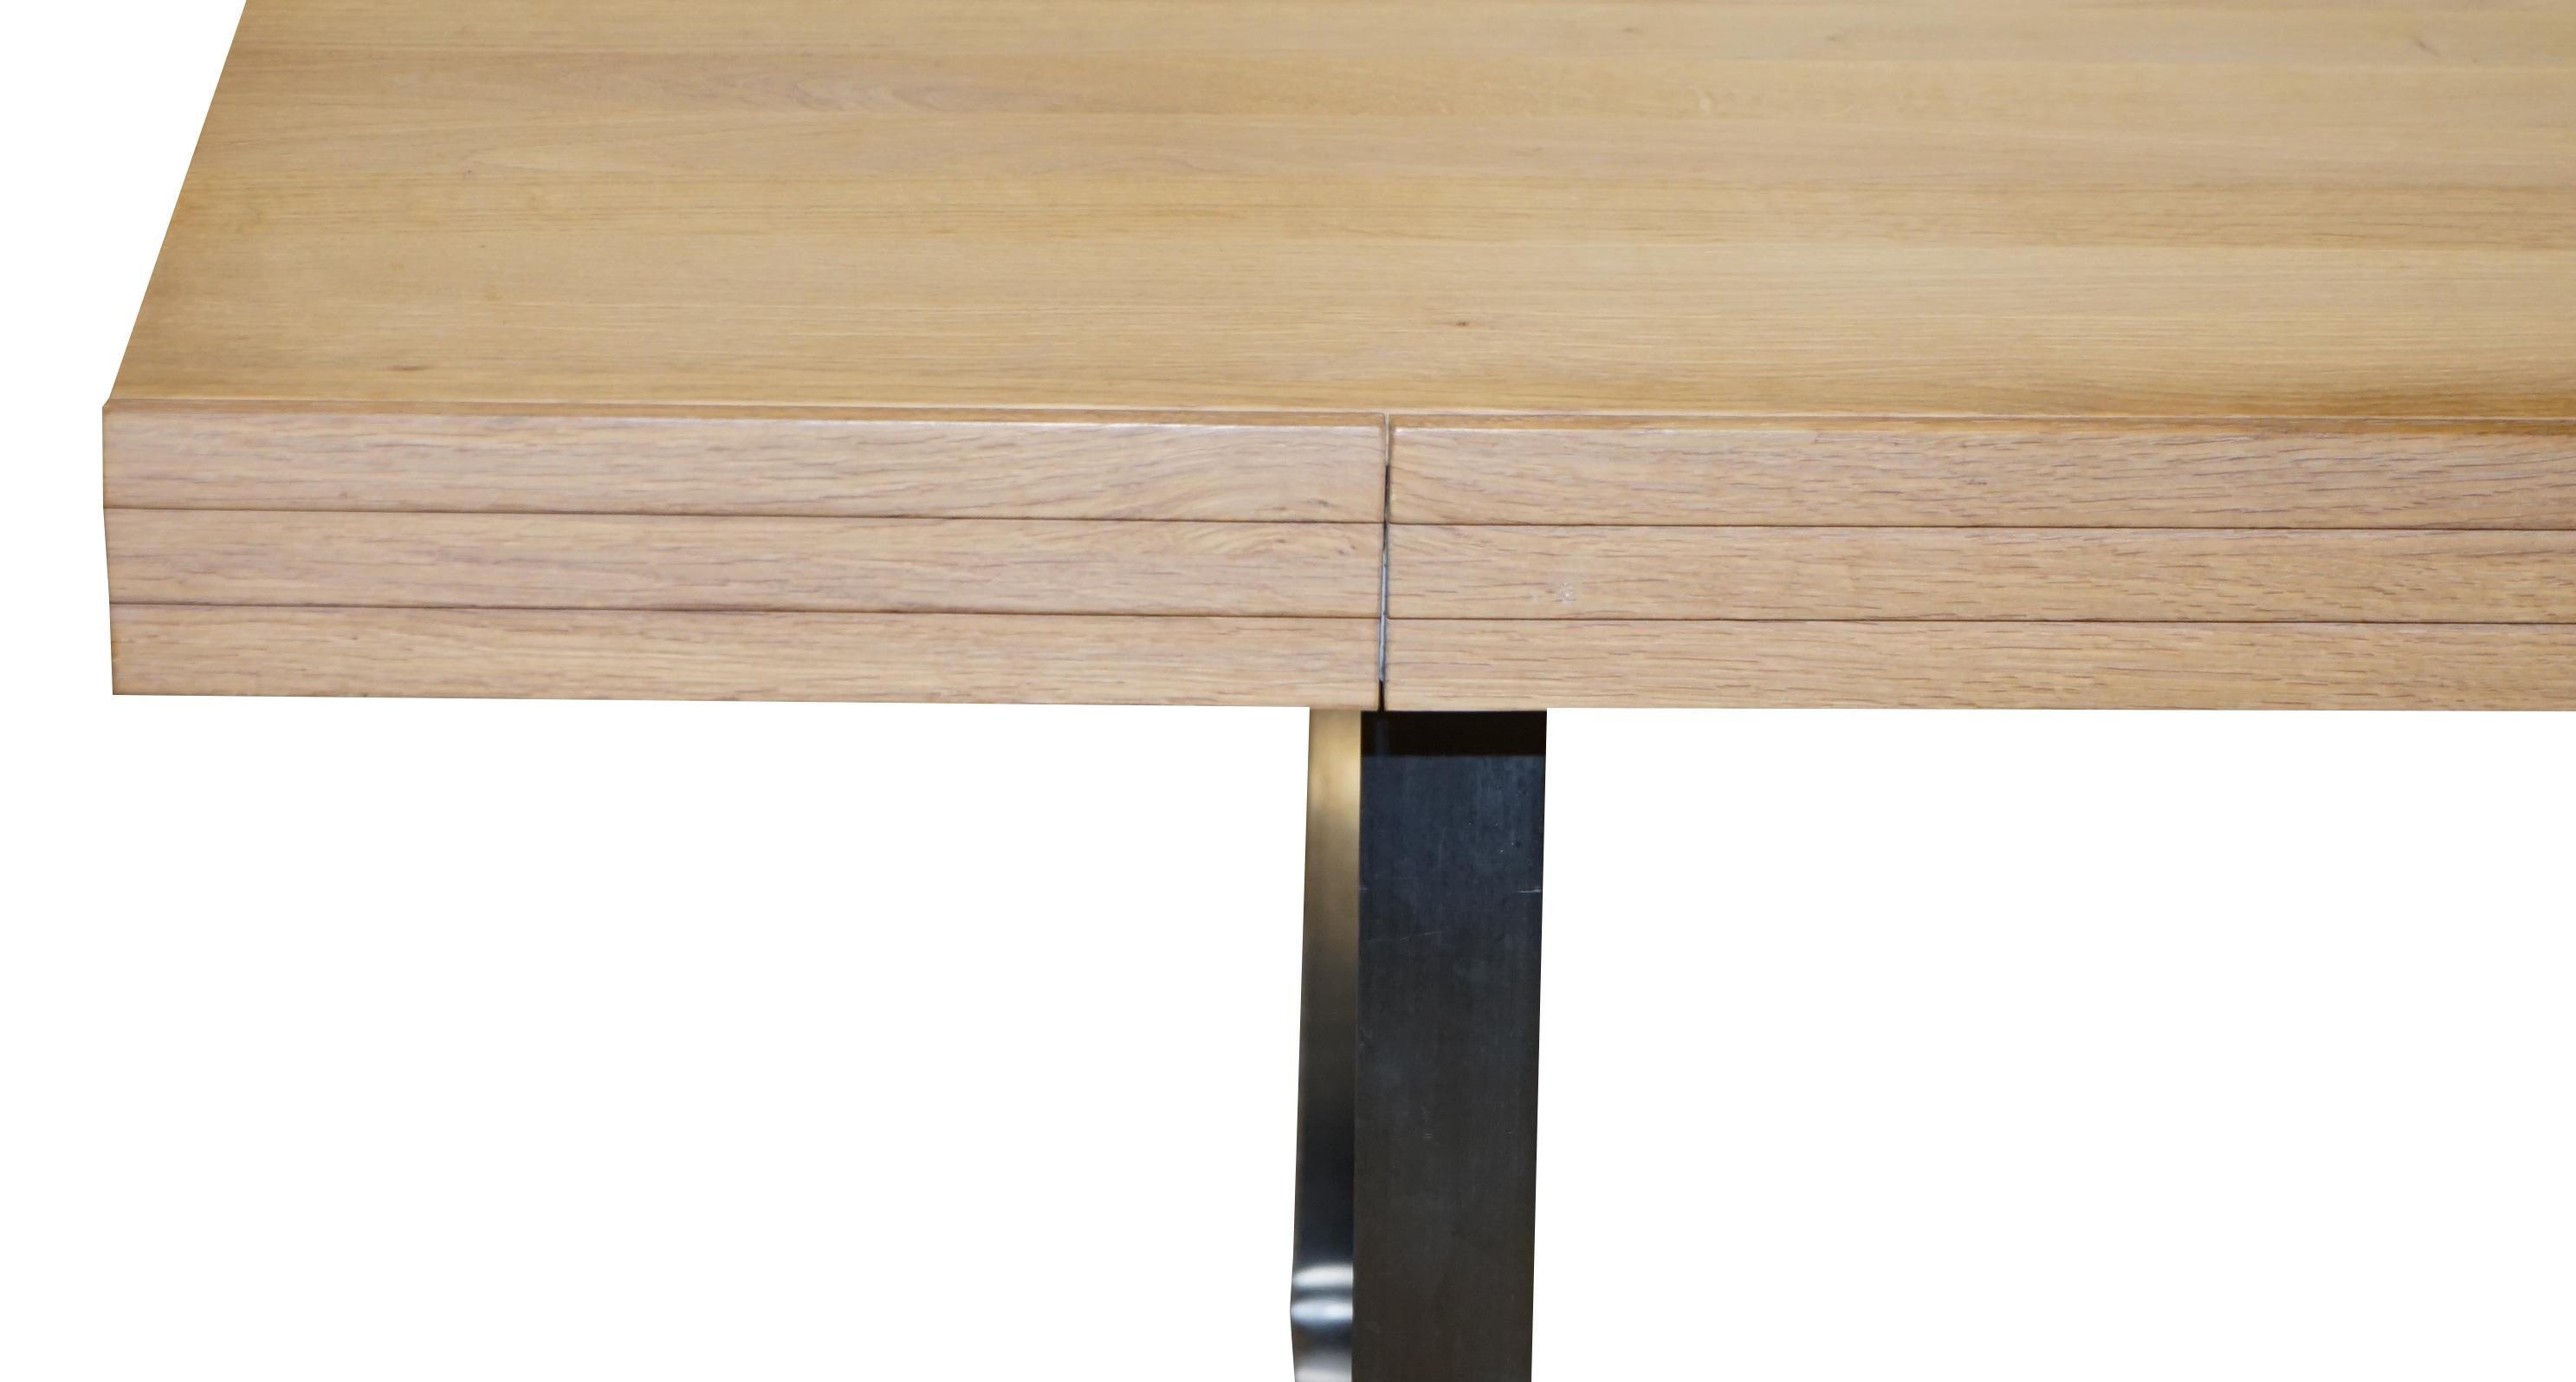 Hand-Crafted Ebbe Gehl Solid Oak and Chrome Office Desk Drawers Retailed through John Lewis